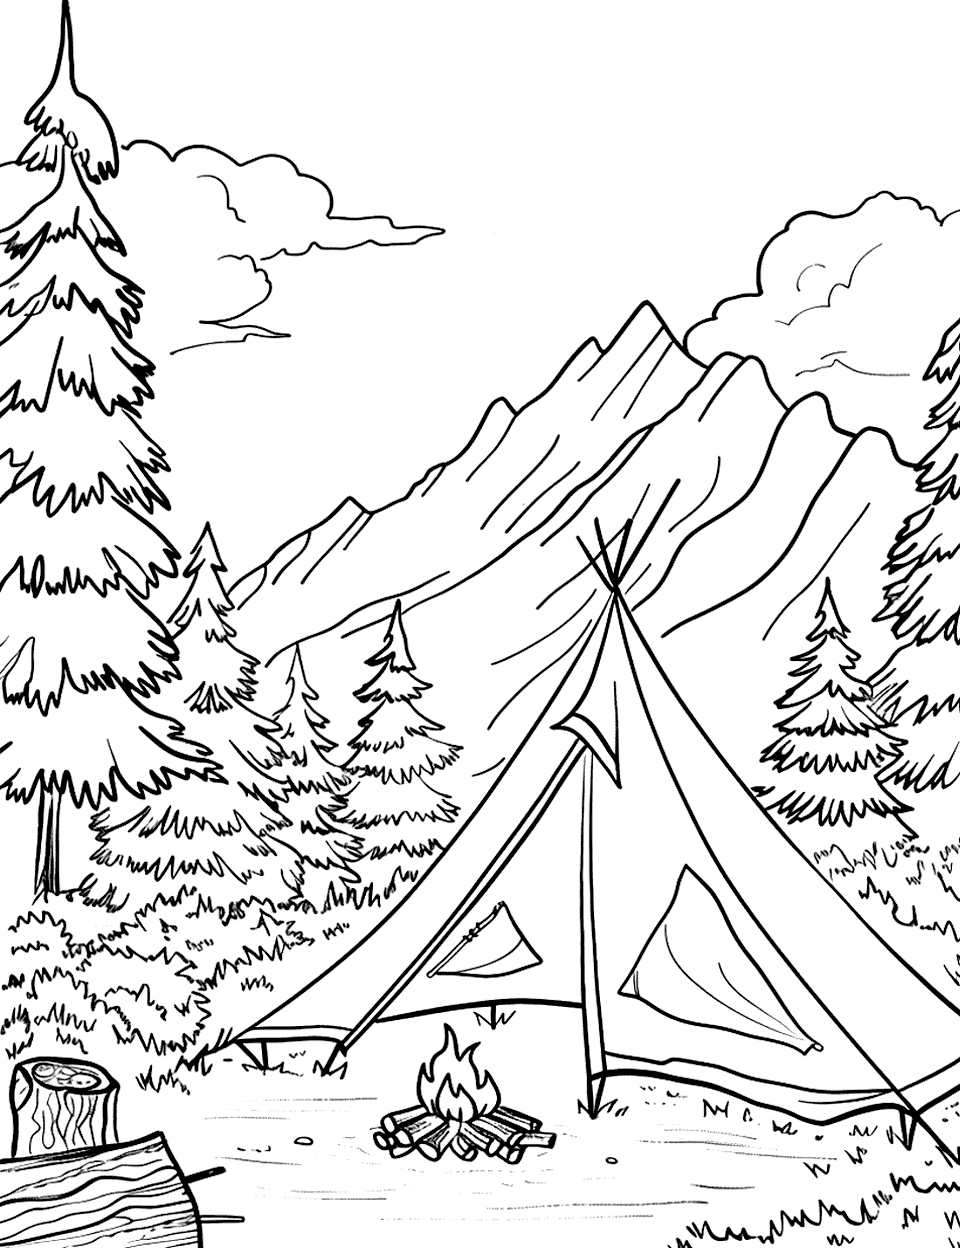 Mountain View Campsite Camping Coloring Page - A tent on mountain range, with a small campfire in front.